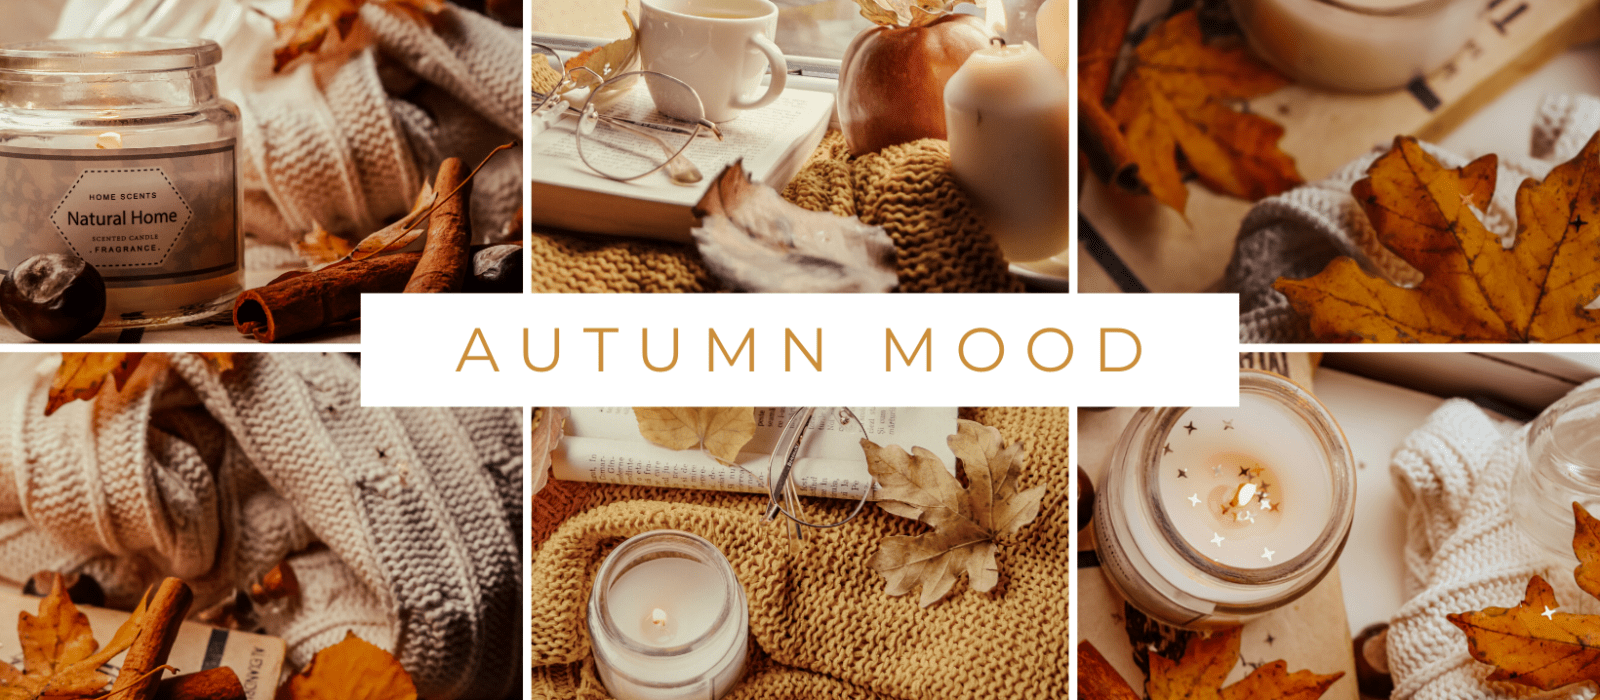 decorating your home for autumn